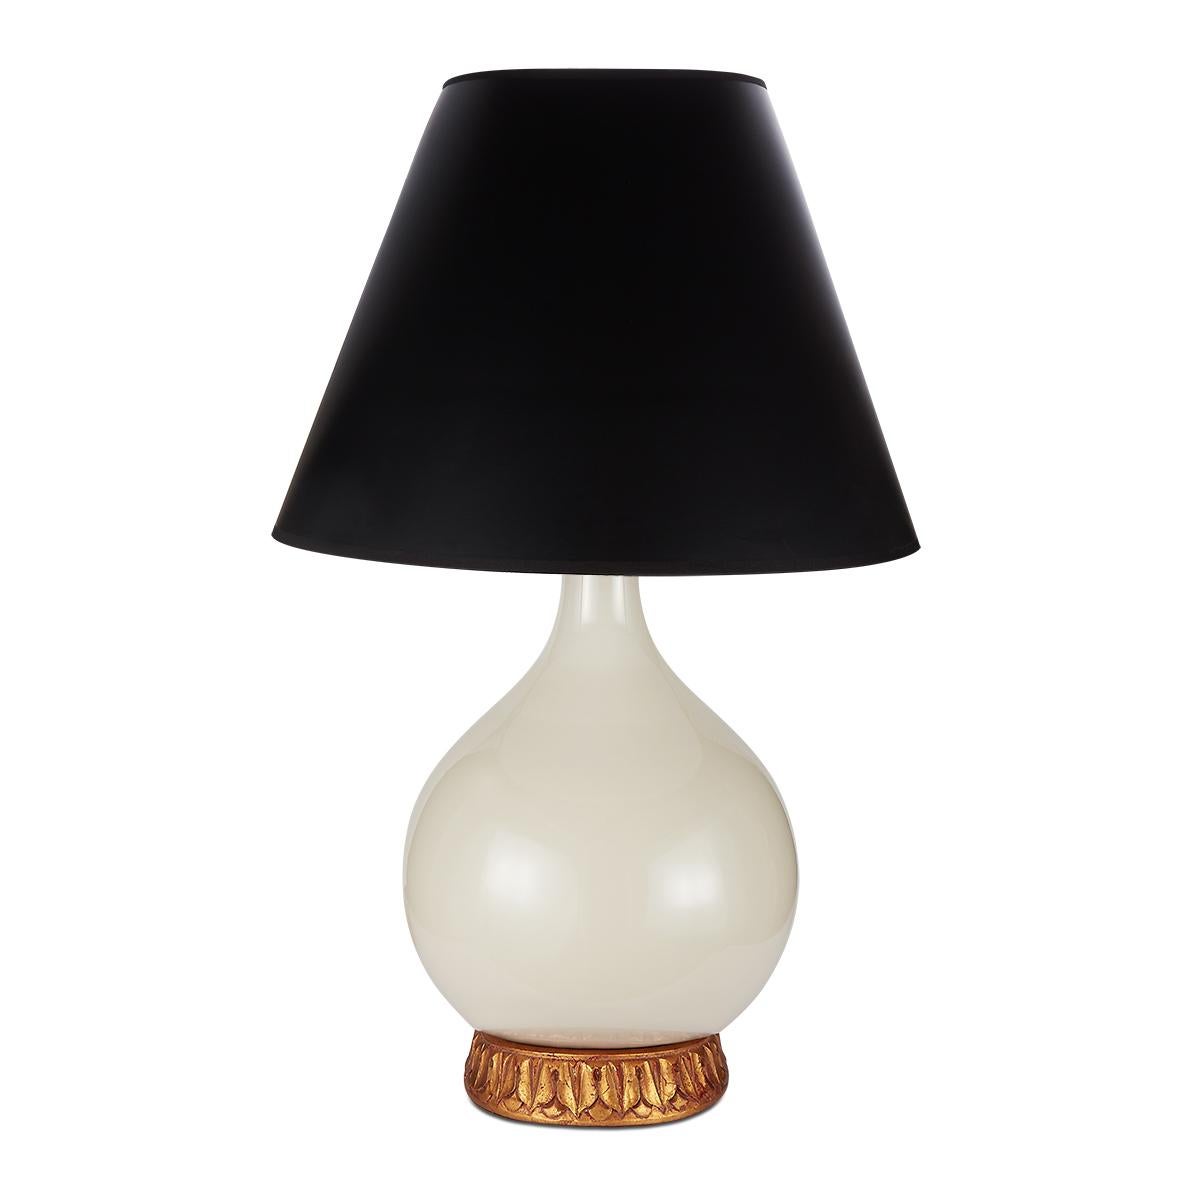 The pearl, with its extraordinary luster and shape, inspired our newest ceramic lamp. Its drop-shaped body tapers at the neck, where the rich glaze reveals--just slightly--red undertones which give depth to the white glaze belly. The ceramic body is